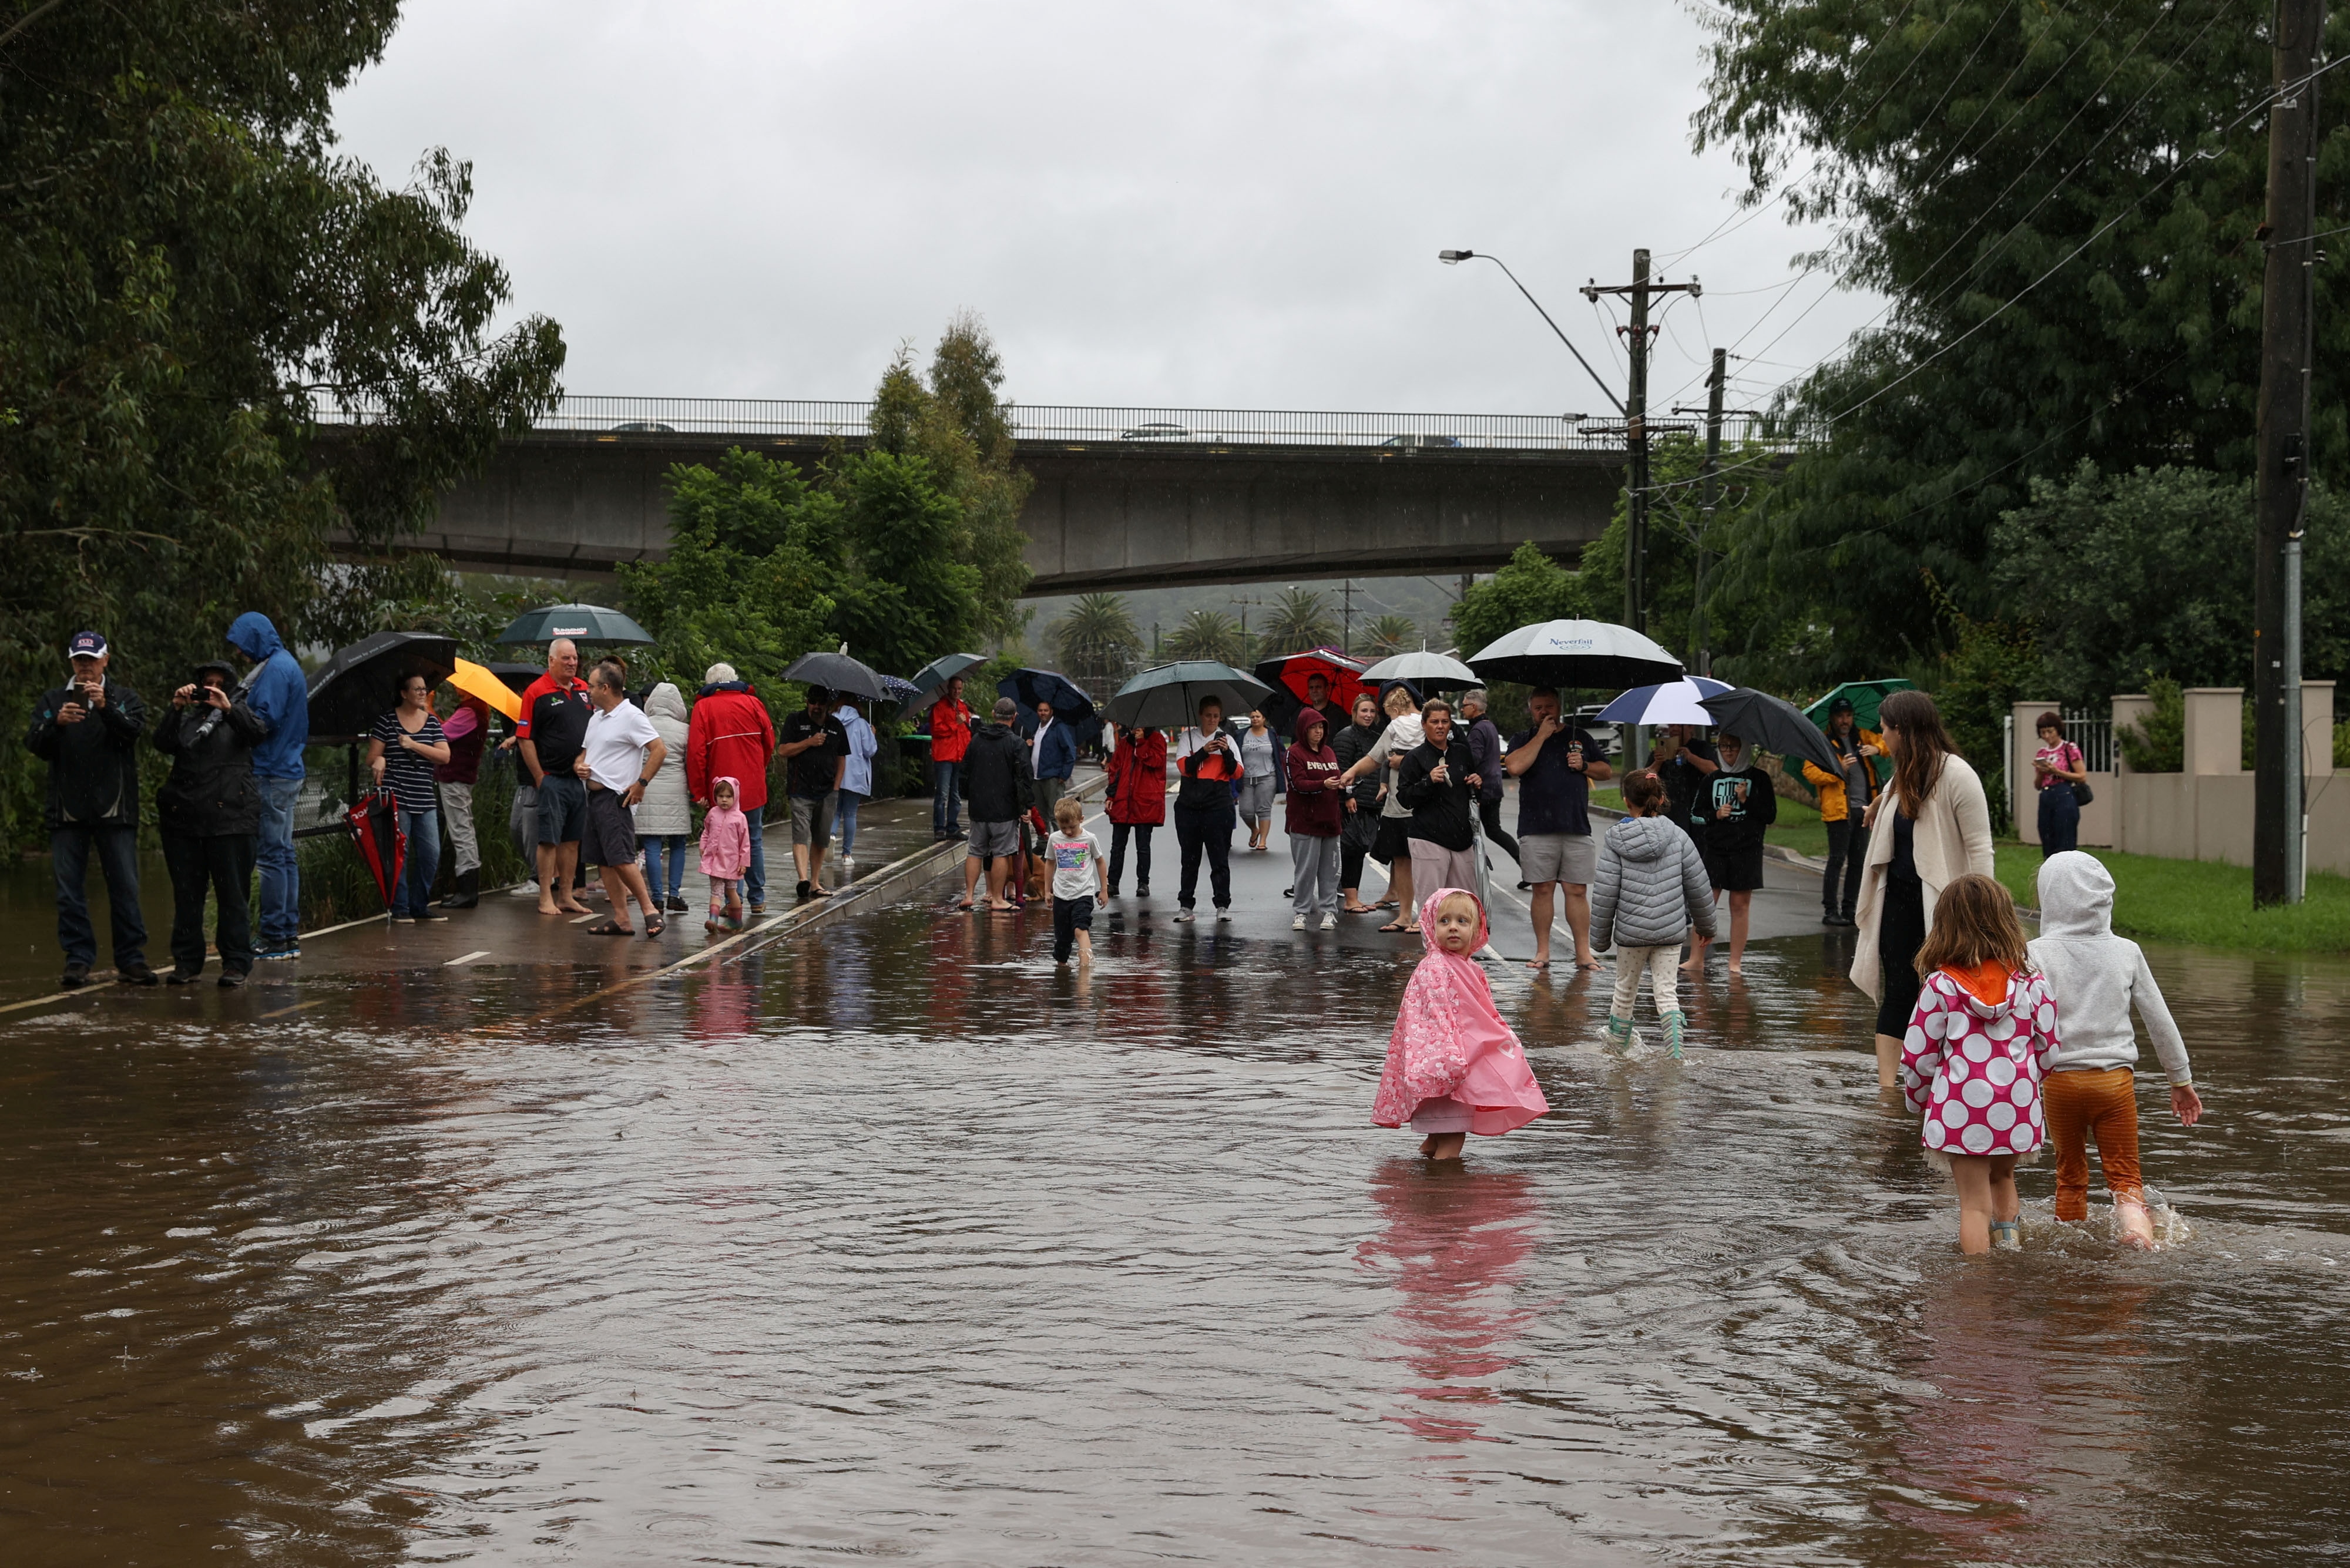 In Photos Australia's worst floods in 50 years lead to mass